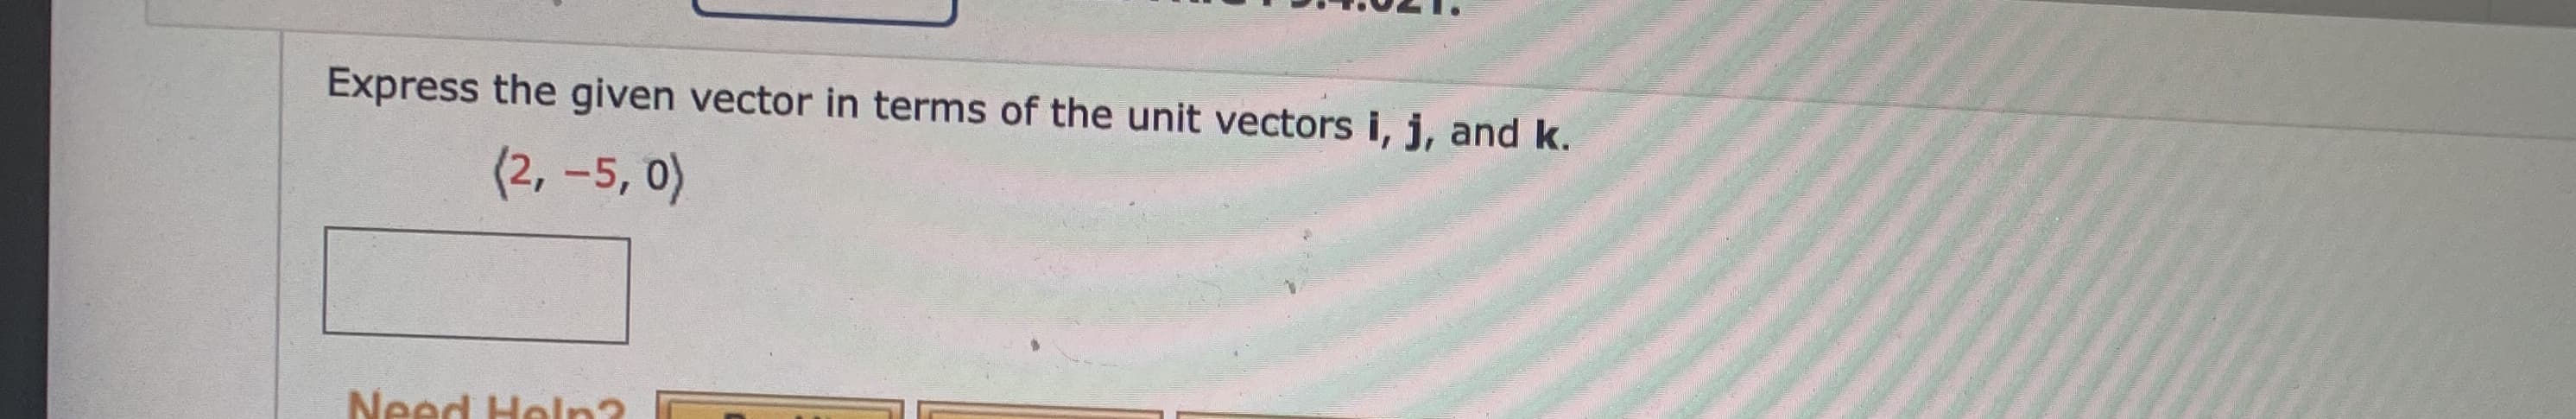 Express the given vector in terms of the unit vectors i, j, and k.
(2, -5, 0)
